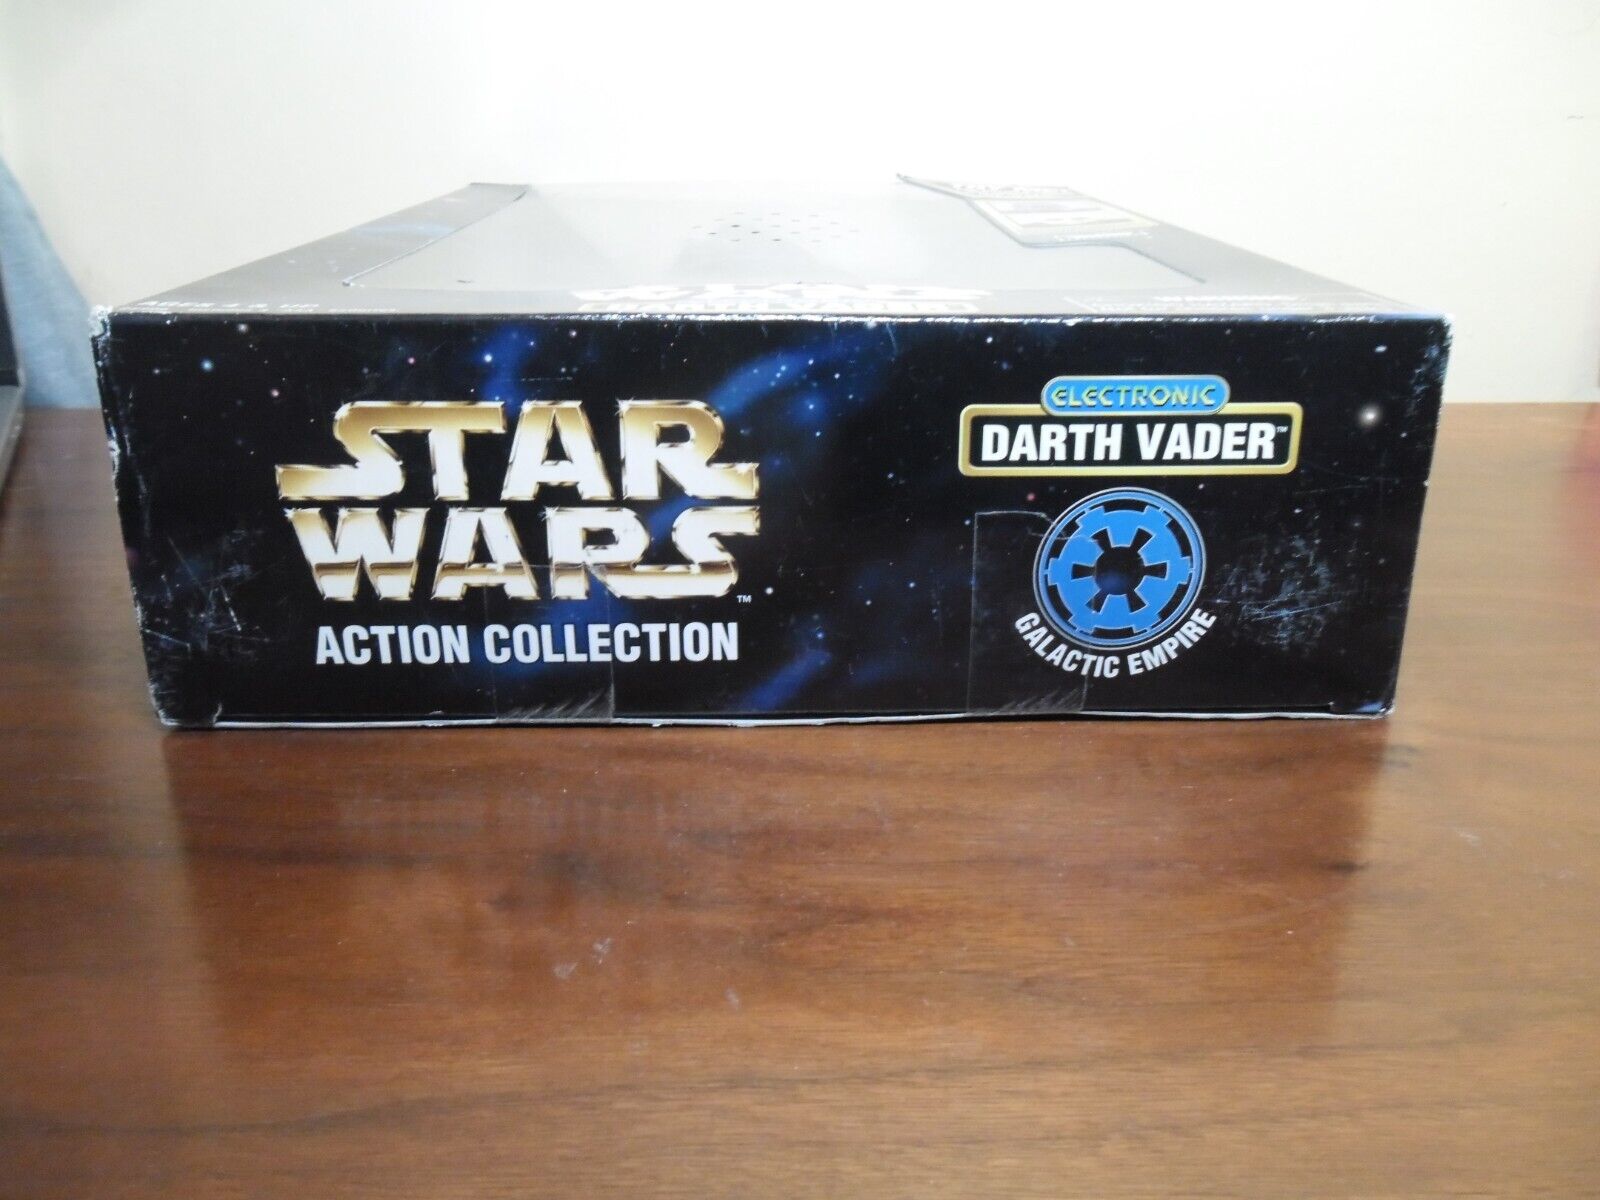 1998 Star Wars Action Collection Electronic Darth Vader 12 inch Kenner (R) Kenner Animator Doll - фотография #14